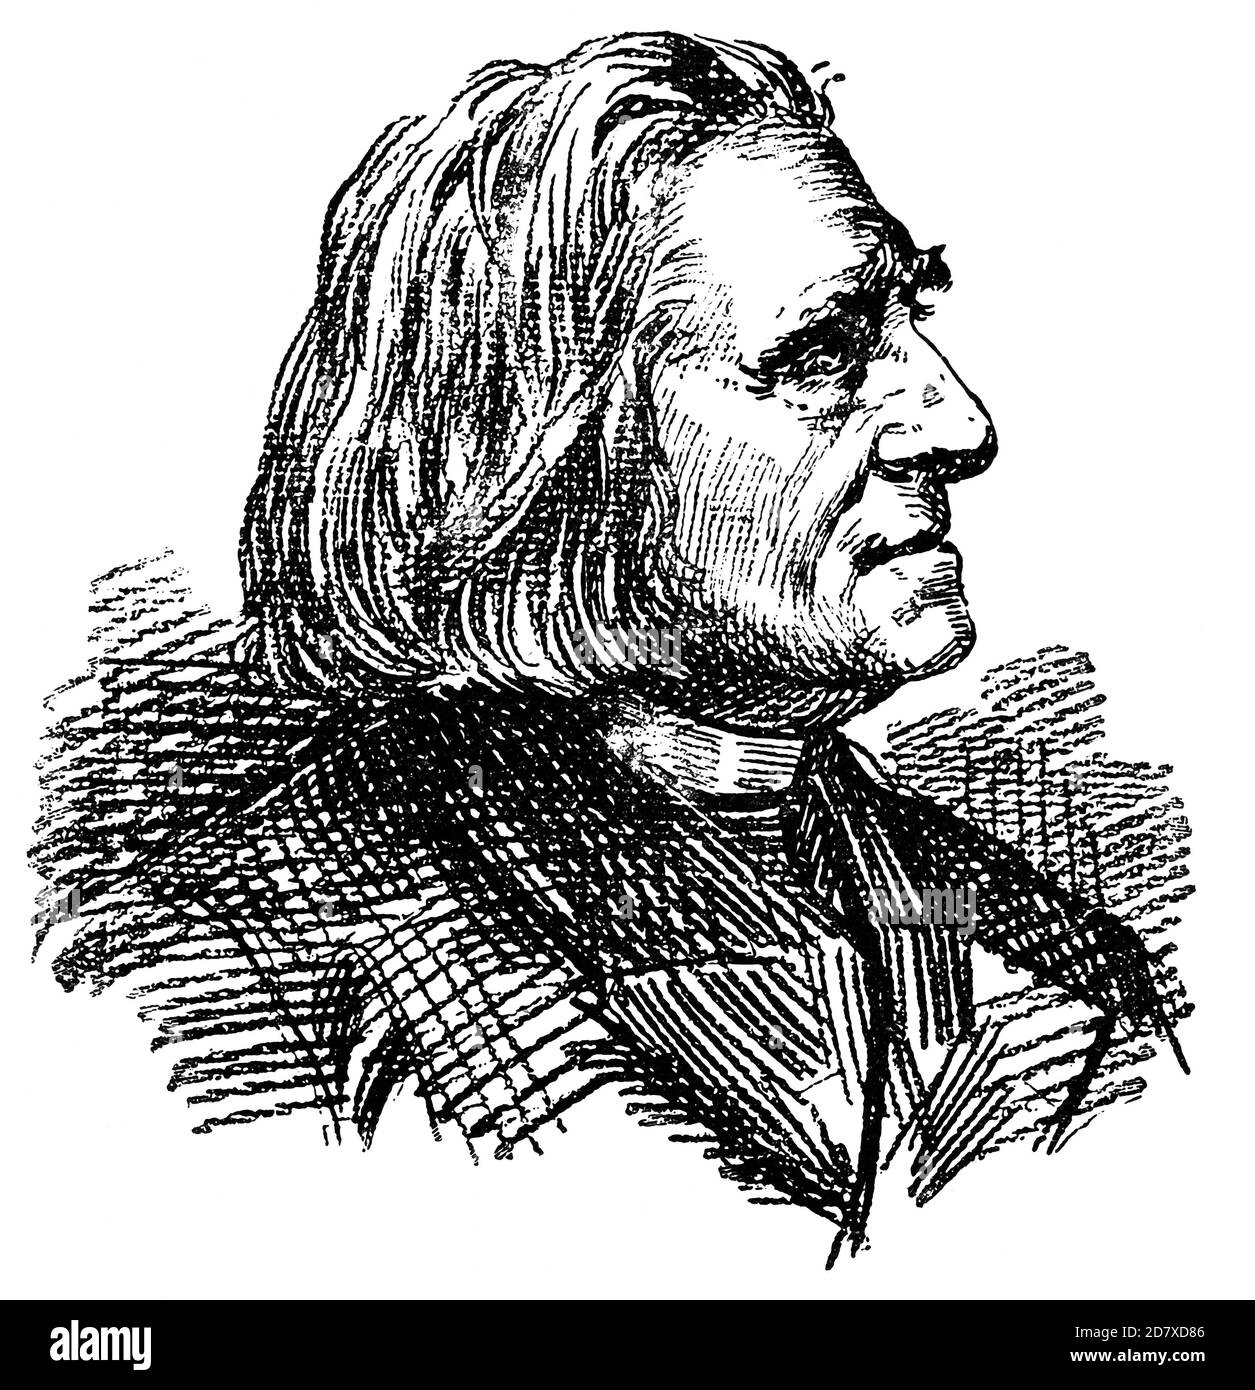 Portrait of Franz Liszt (mature years) - a Hungarian composer, virtuoso pianist, conductor, music teacher, arranger, and organist of the Romantic era. Illustration of the 19th century. White background. Stock Photo